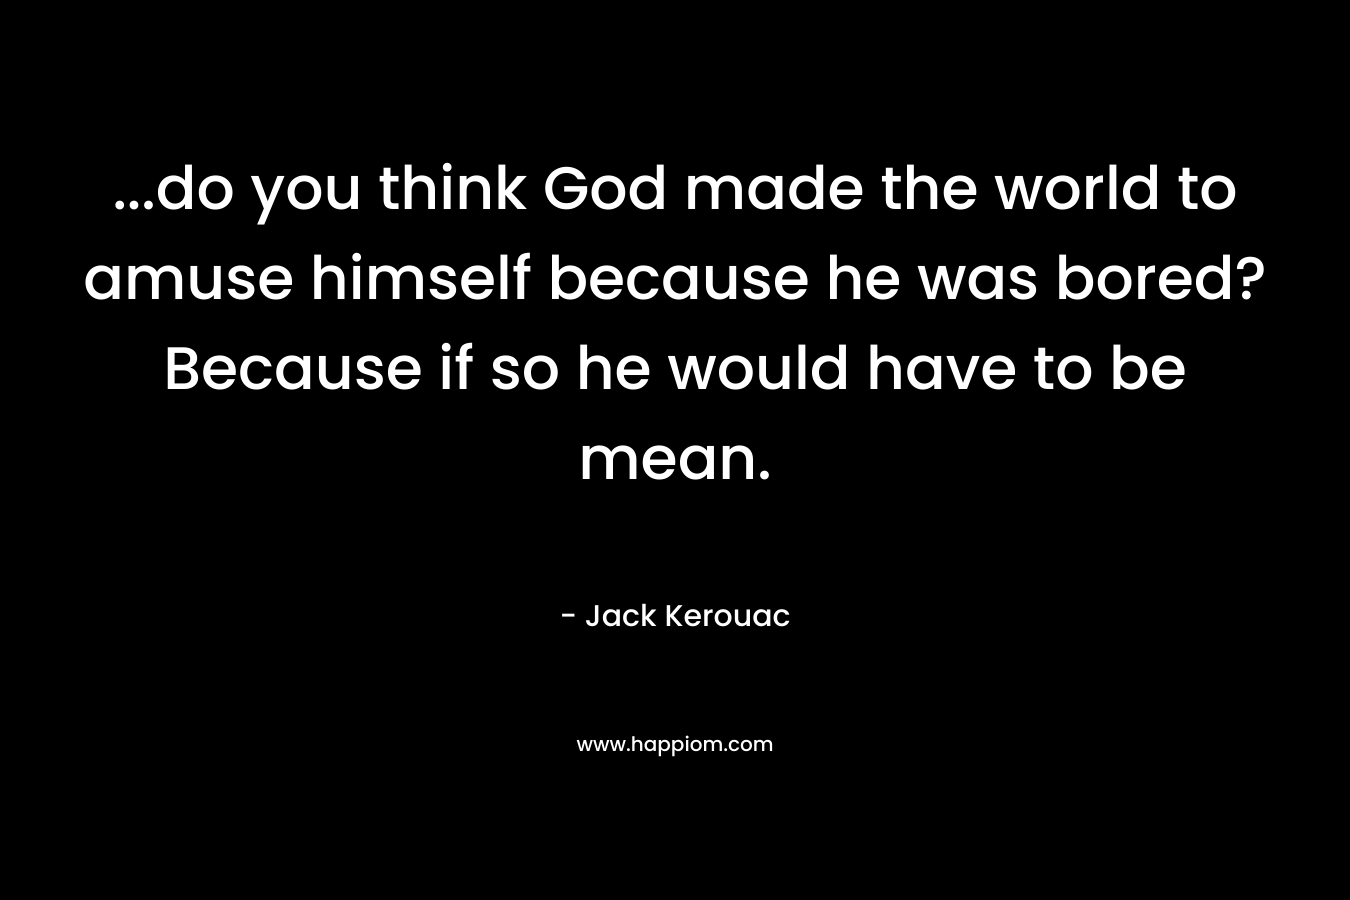 …do you think God made the world to amuse himself because he was bored? Because if so he would have to be mean. – Jack Kerouac